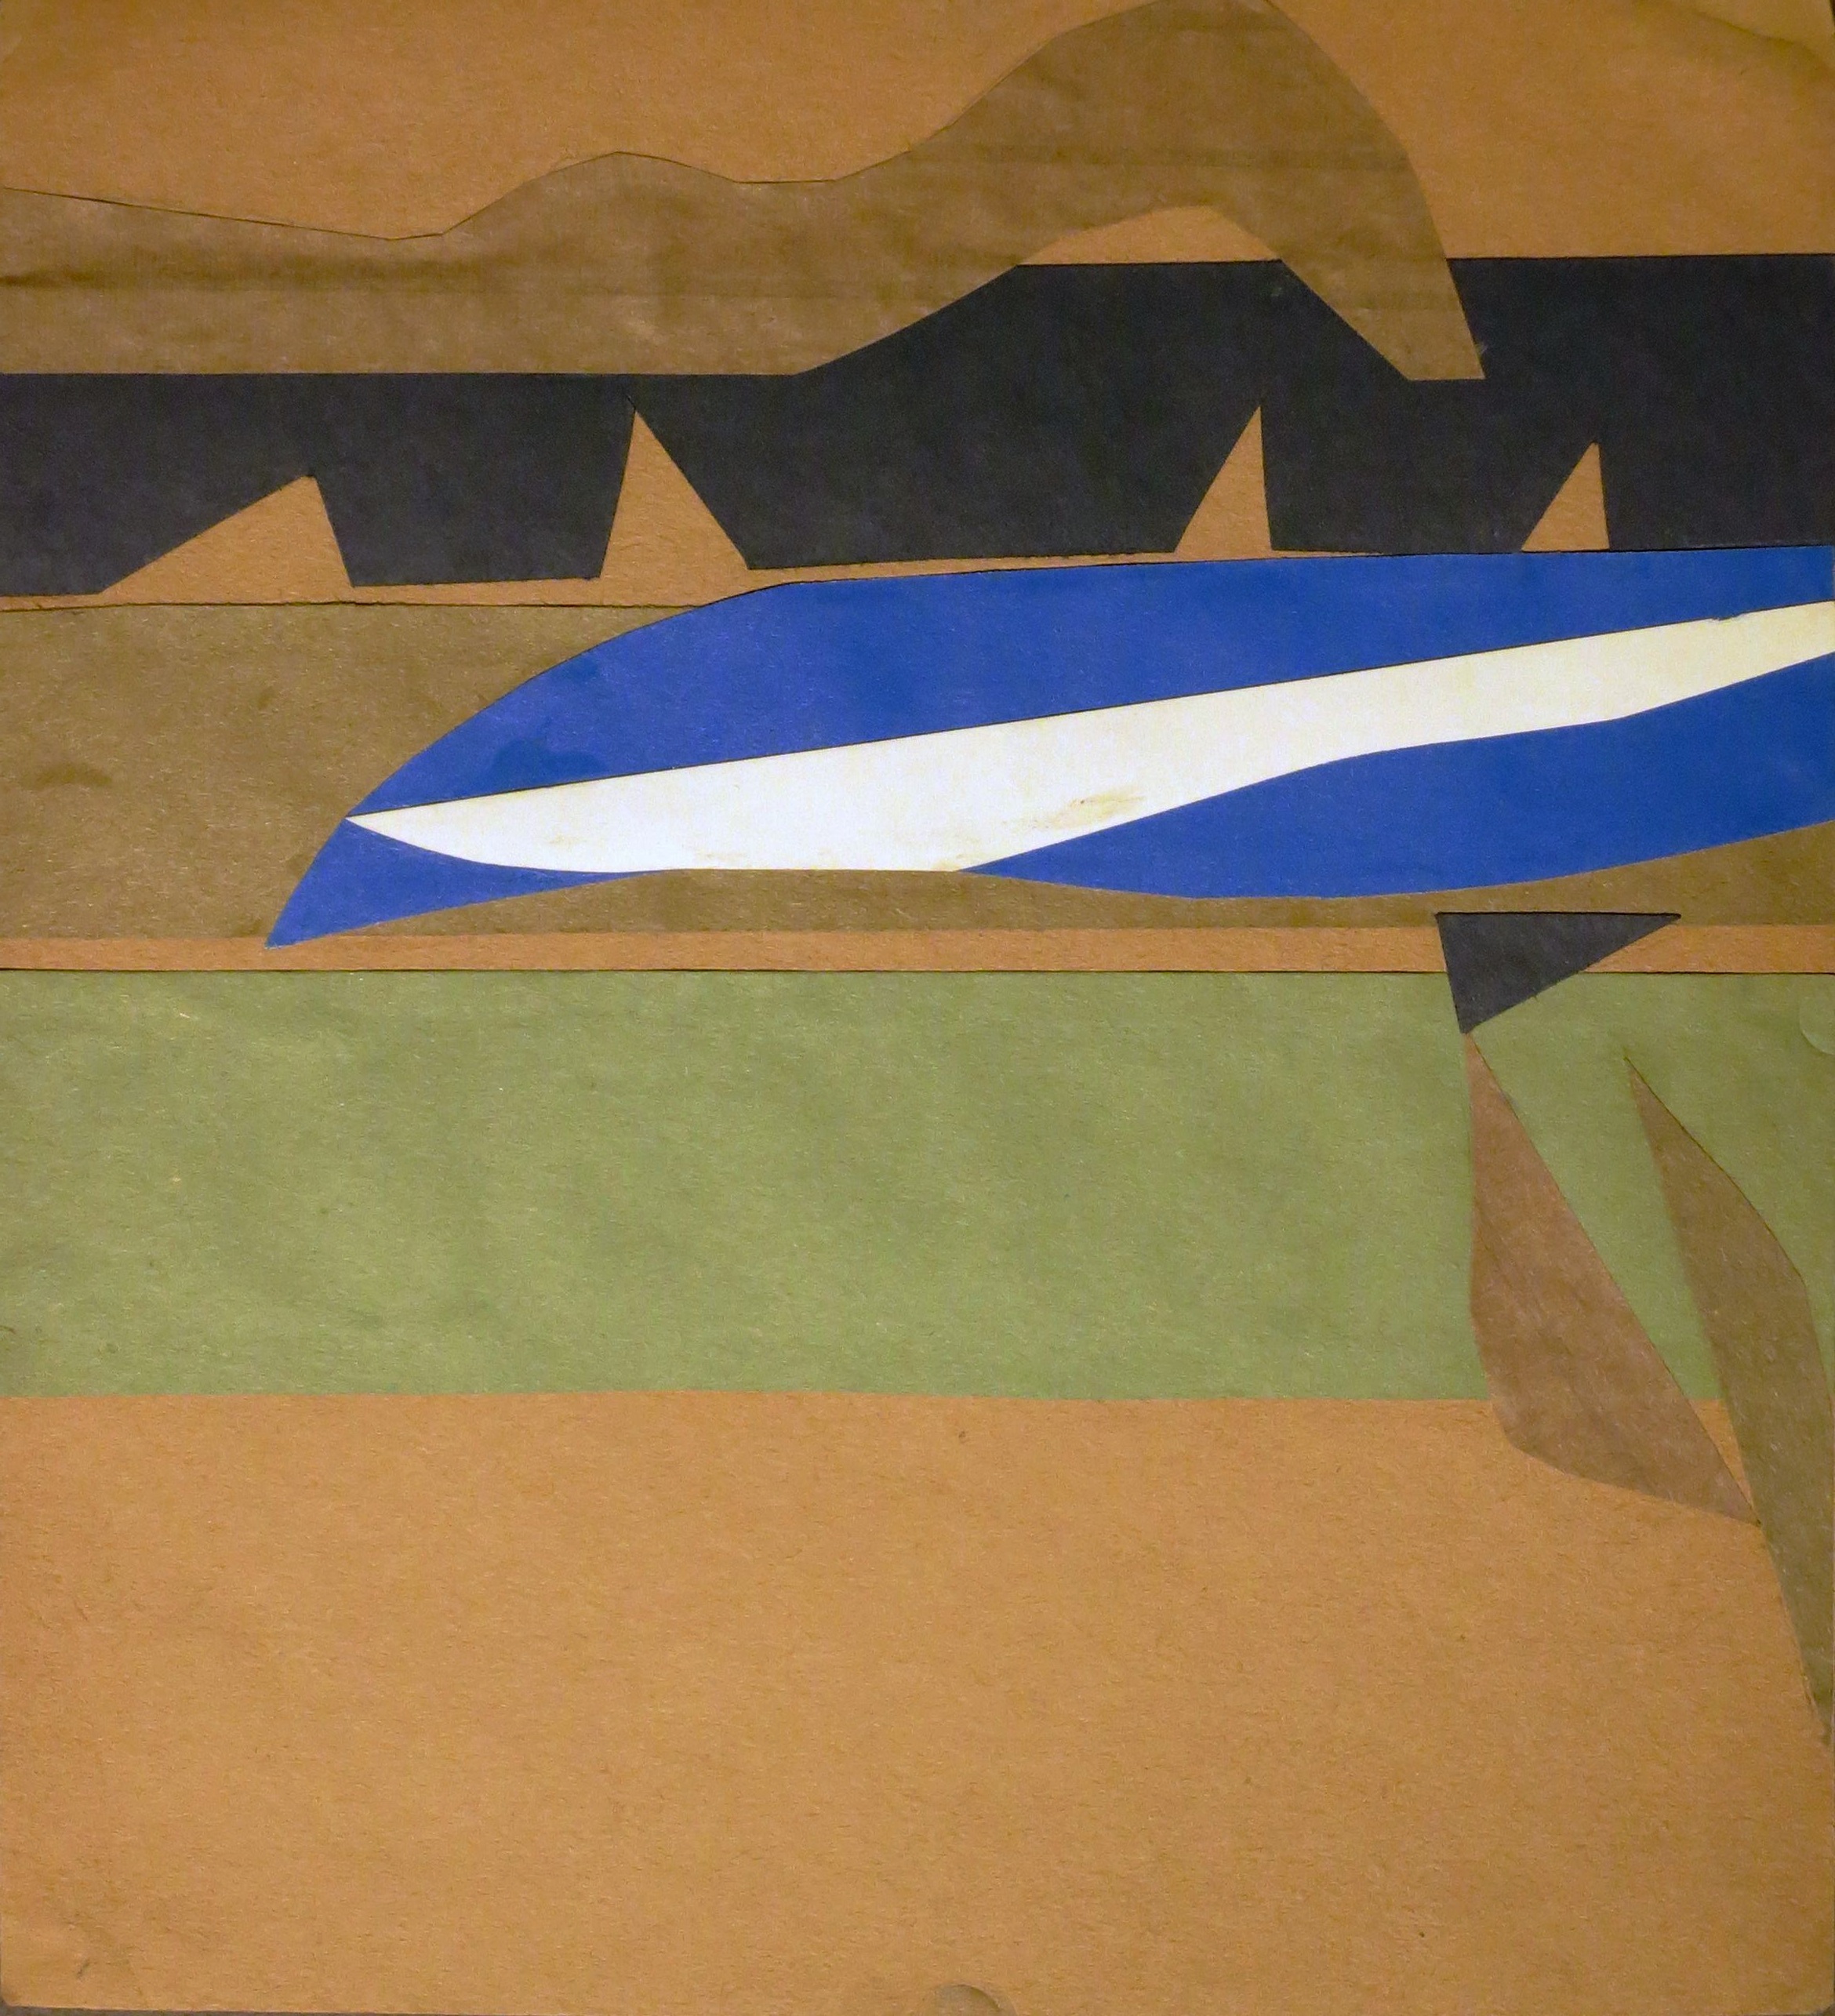 Abstract collage on brown paper with green, blue, white, and black